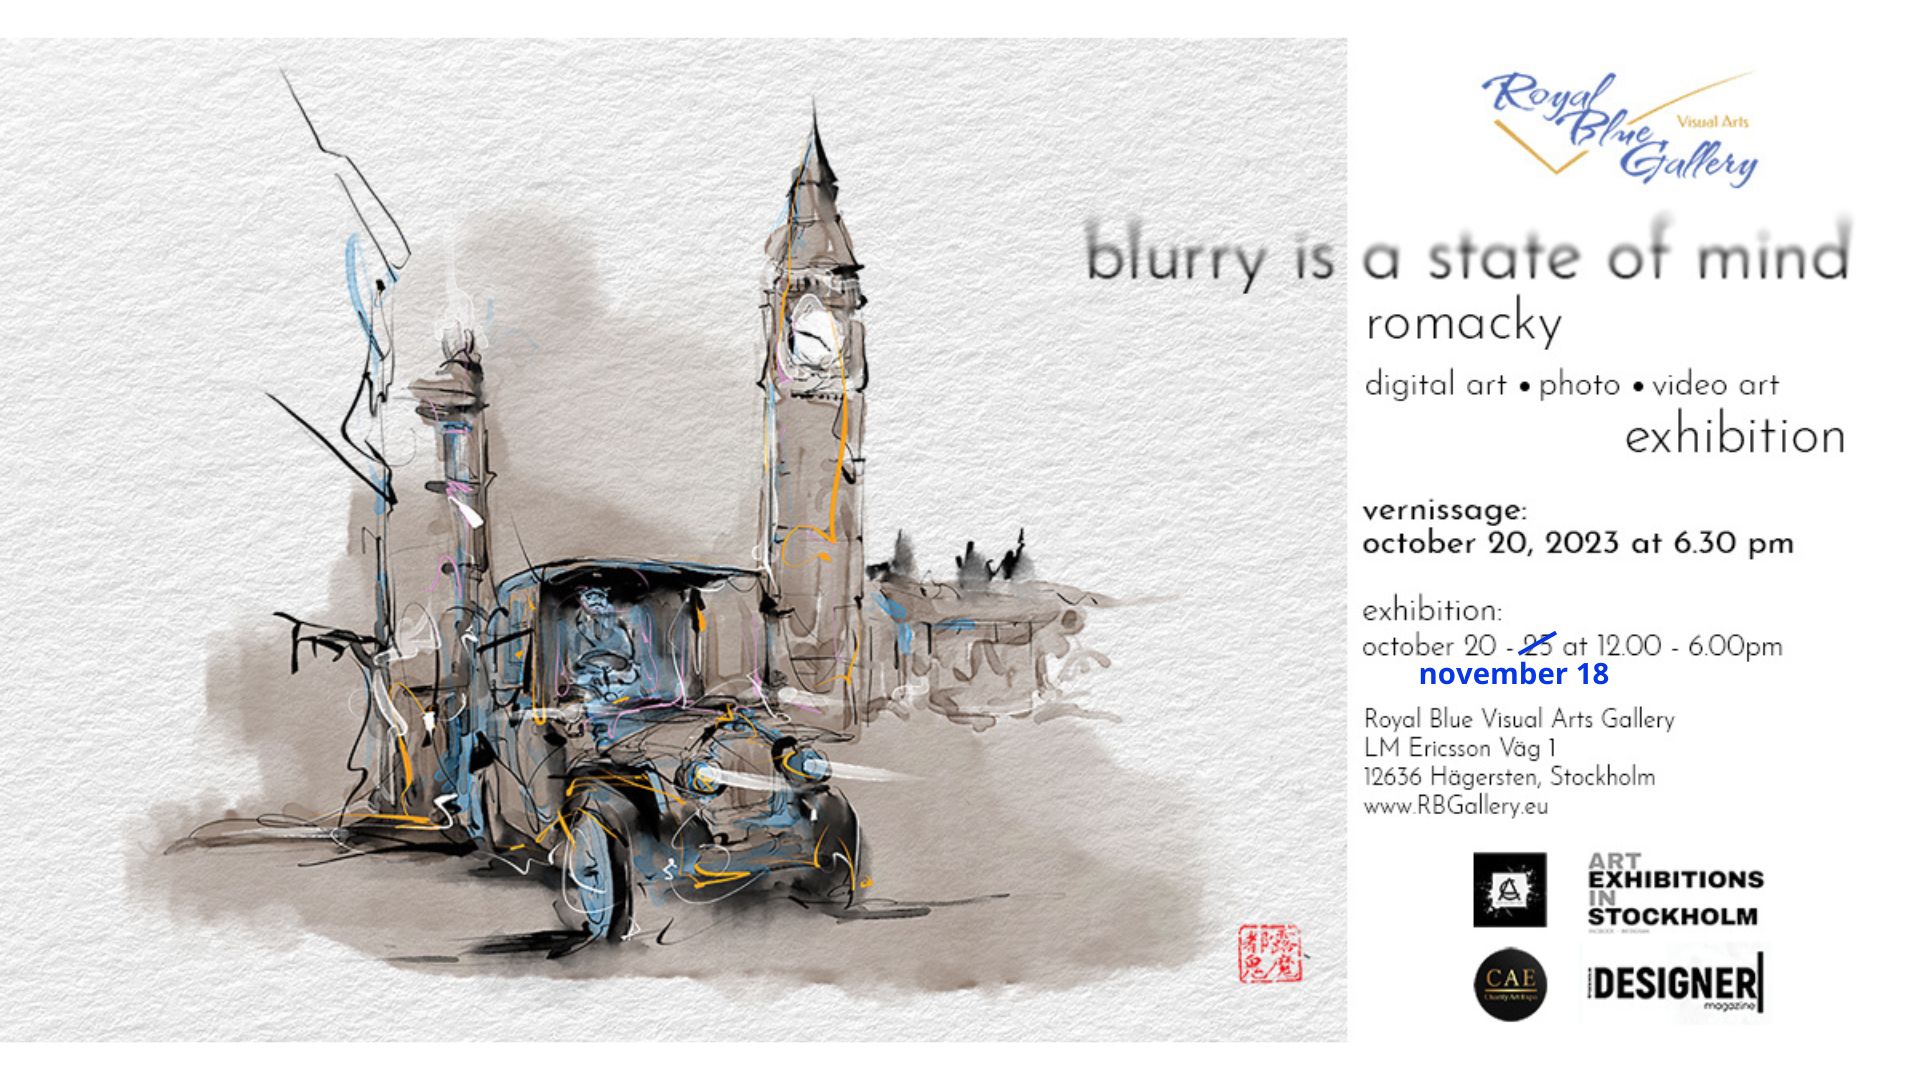 Blurry is a state of mind – ROMACKY digital art, photo, and video art exhibition